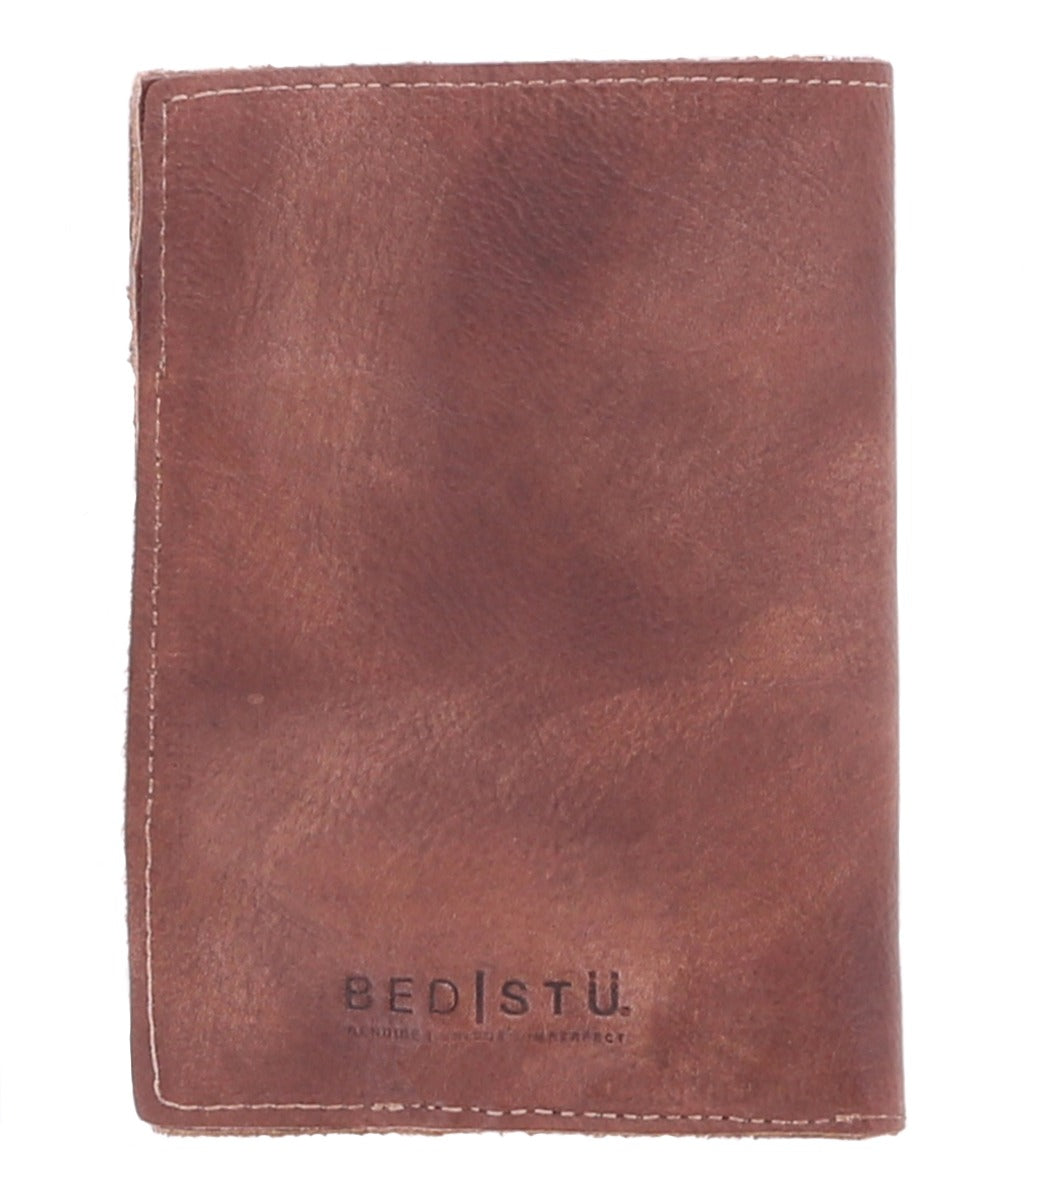 A brown leather Stardust passport holder by Bed Stu.